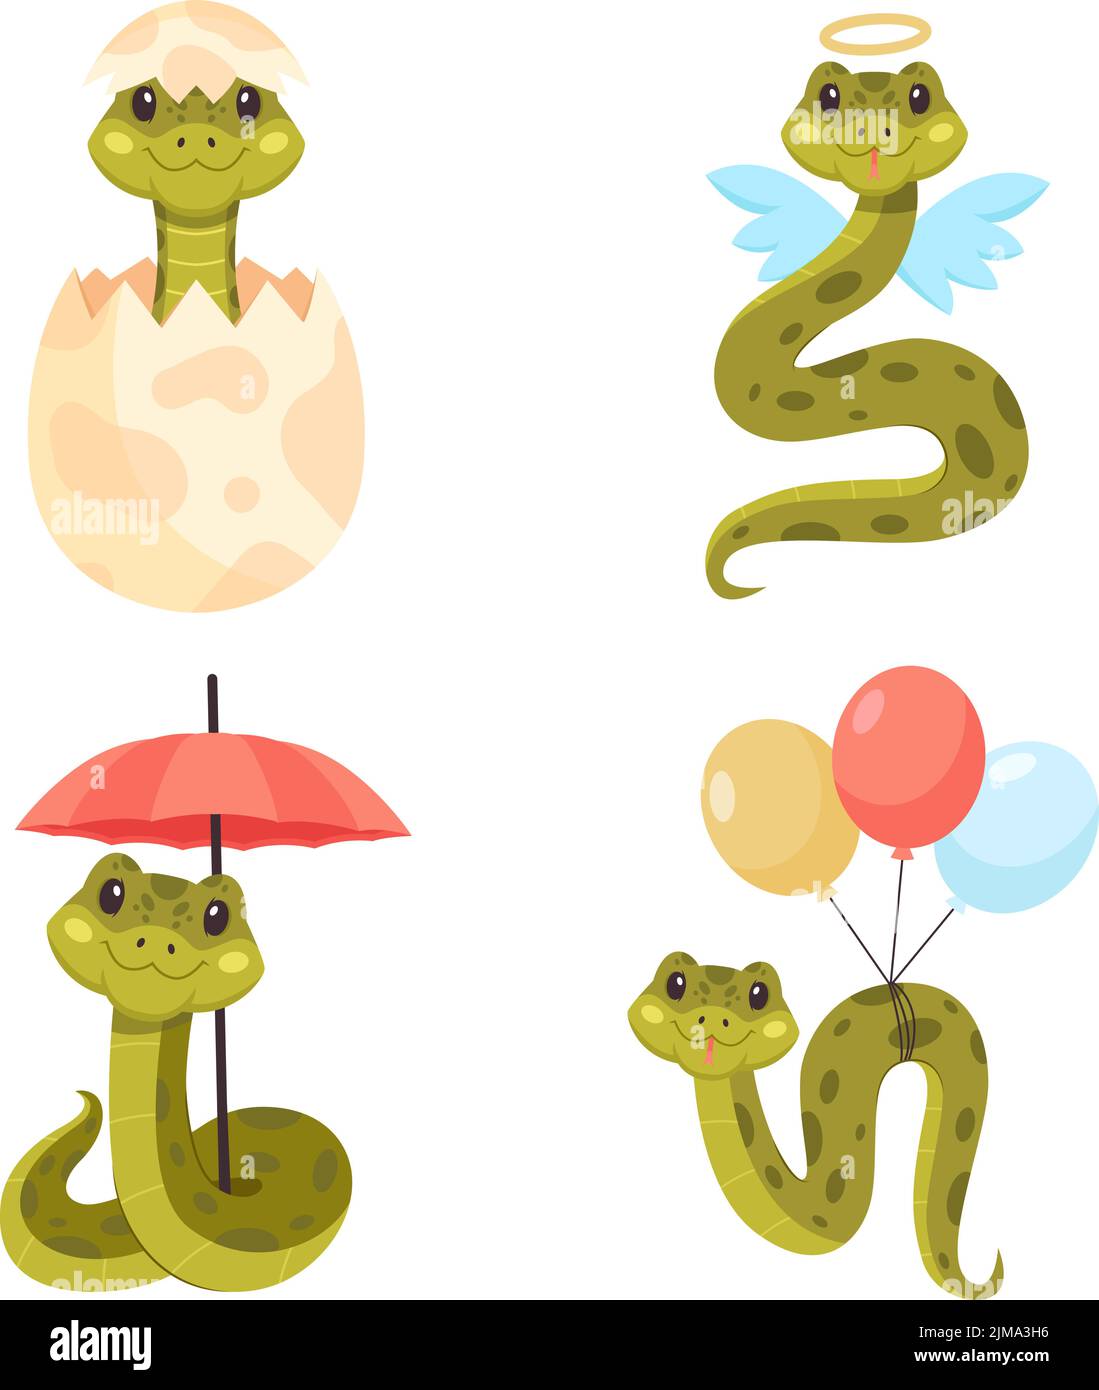 Set of cute hand-drawn snakes in egg shell, flying as angel, sitting under umbrella, flying on balloons Stock Vector